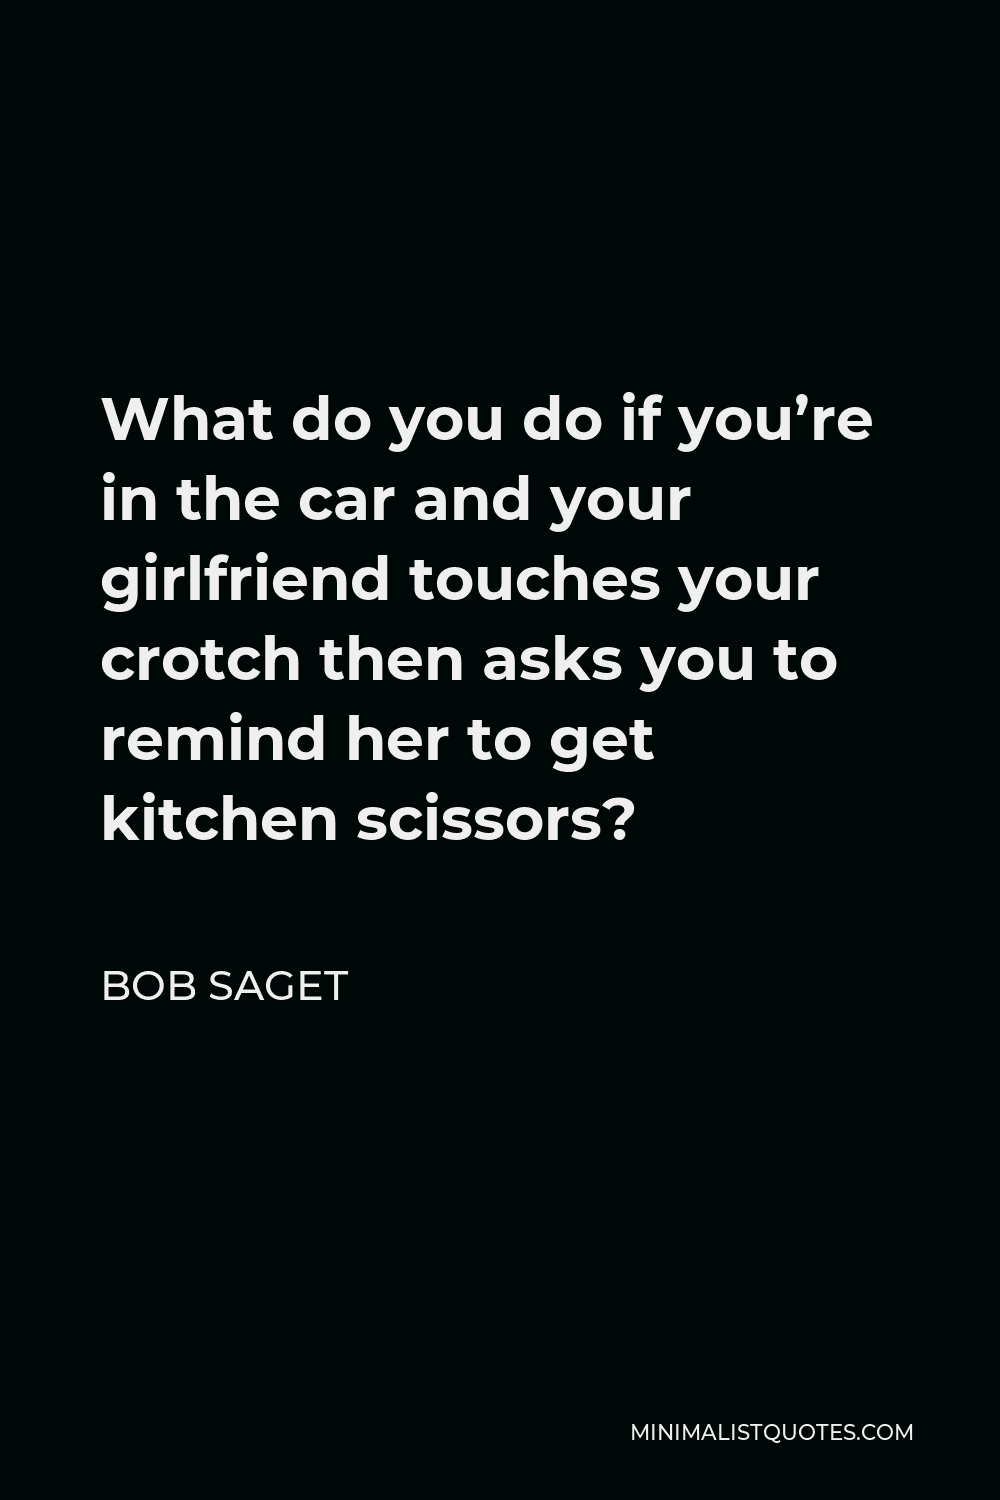 Bob Saget Quote - What do you do if you’re in the car and your girlfriend touches your crotch then asks you to remind her to get kitchen scissors?